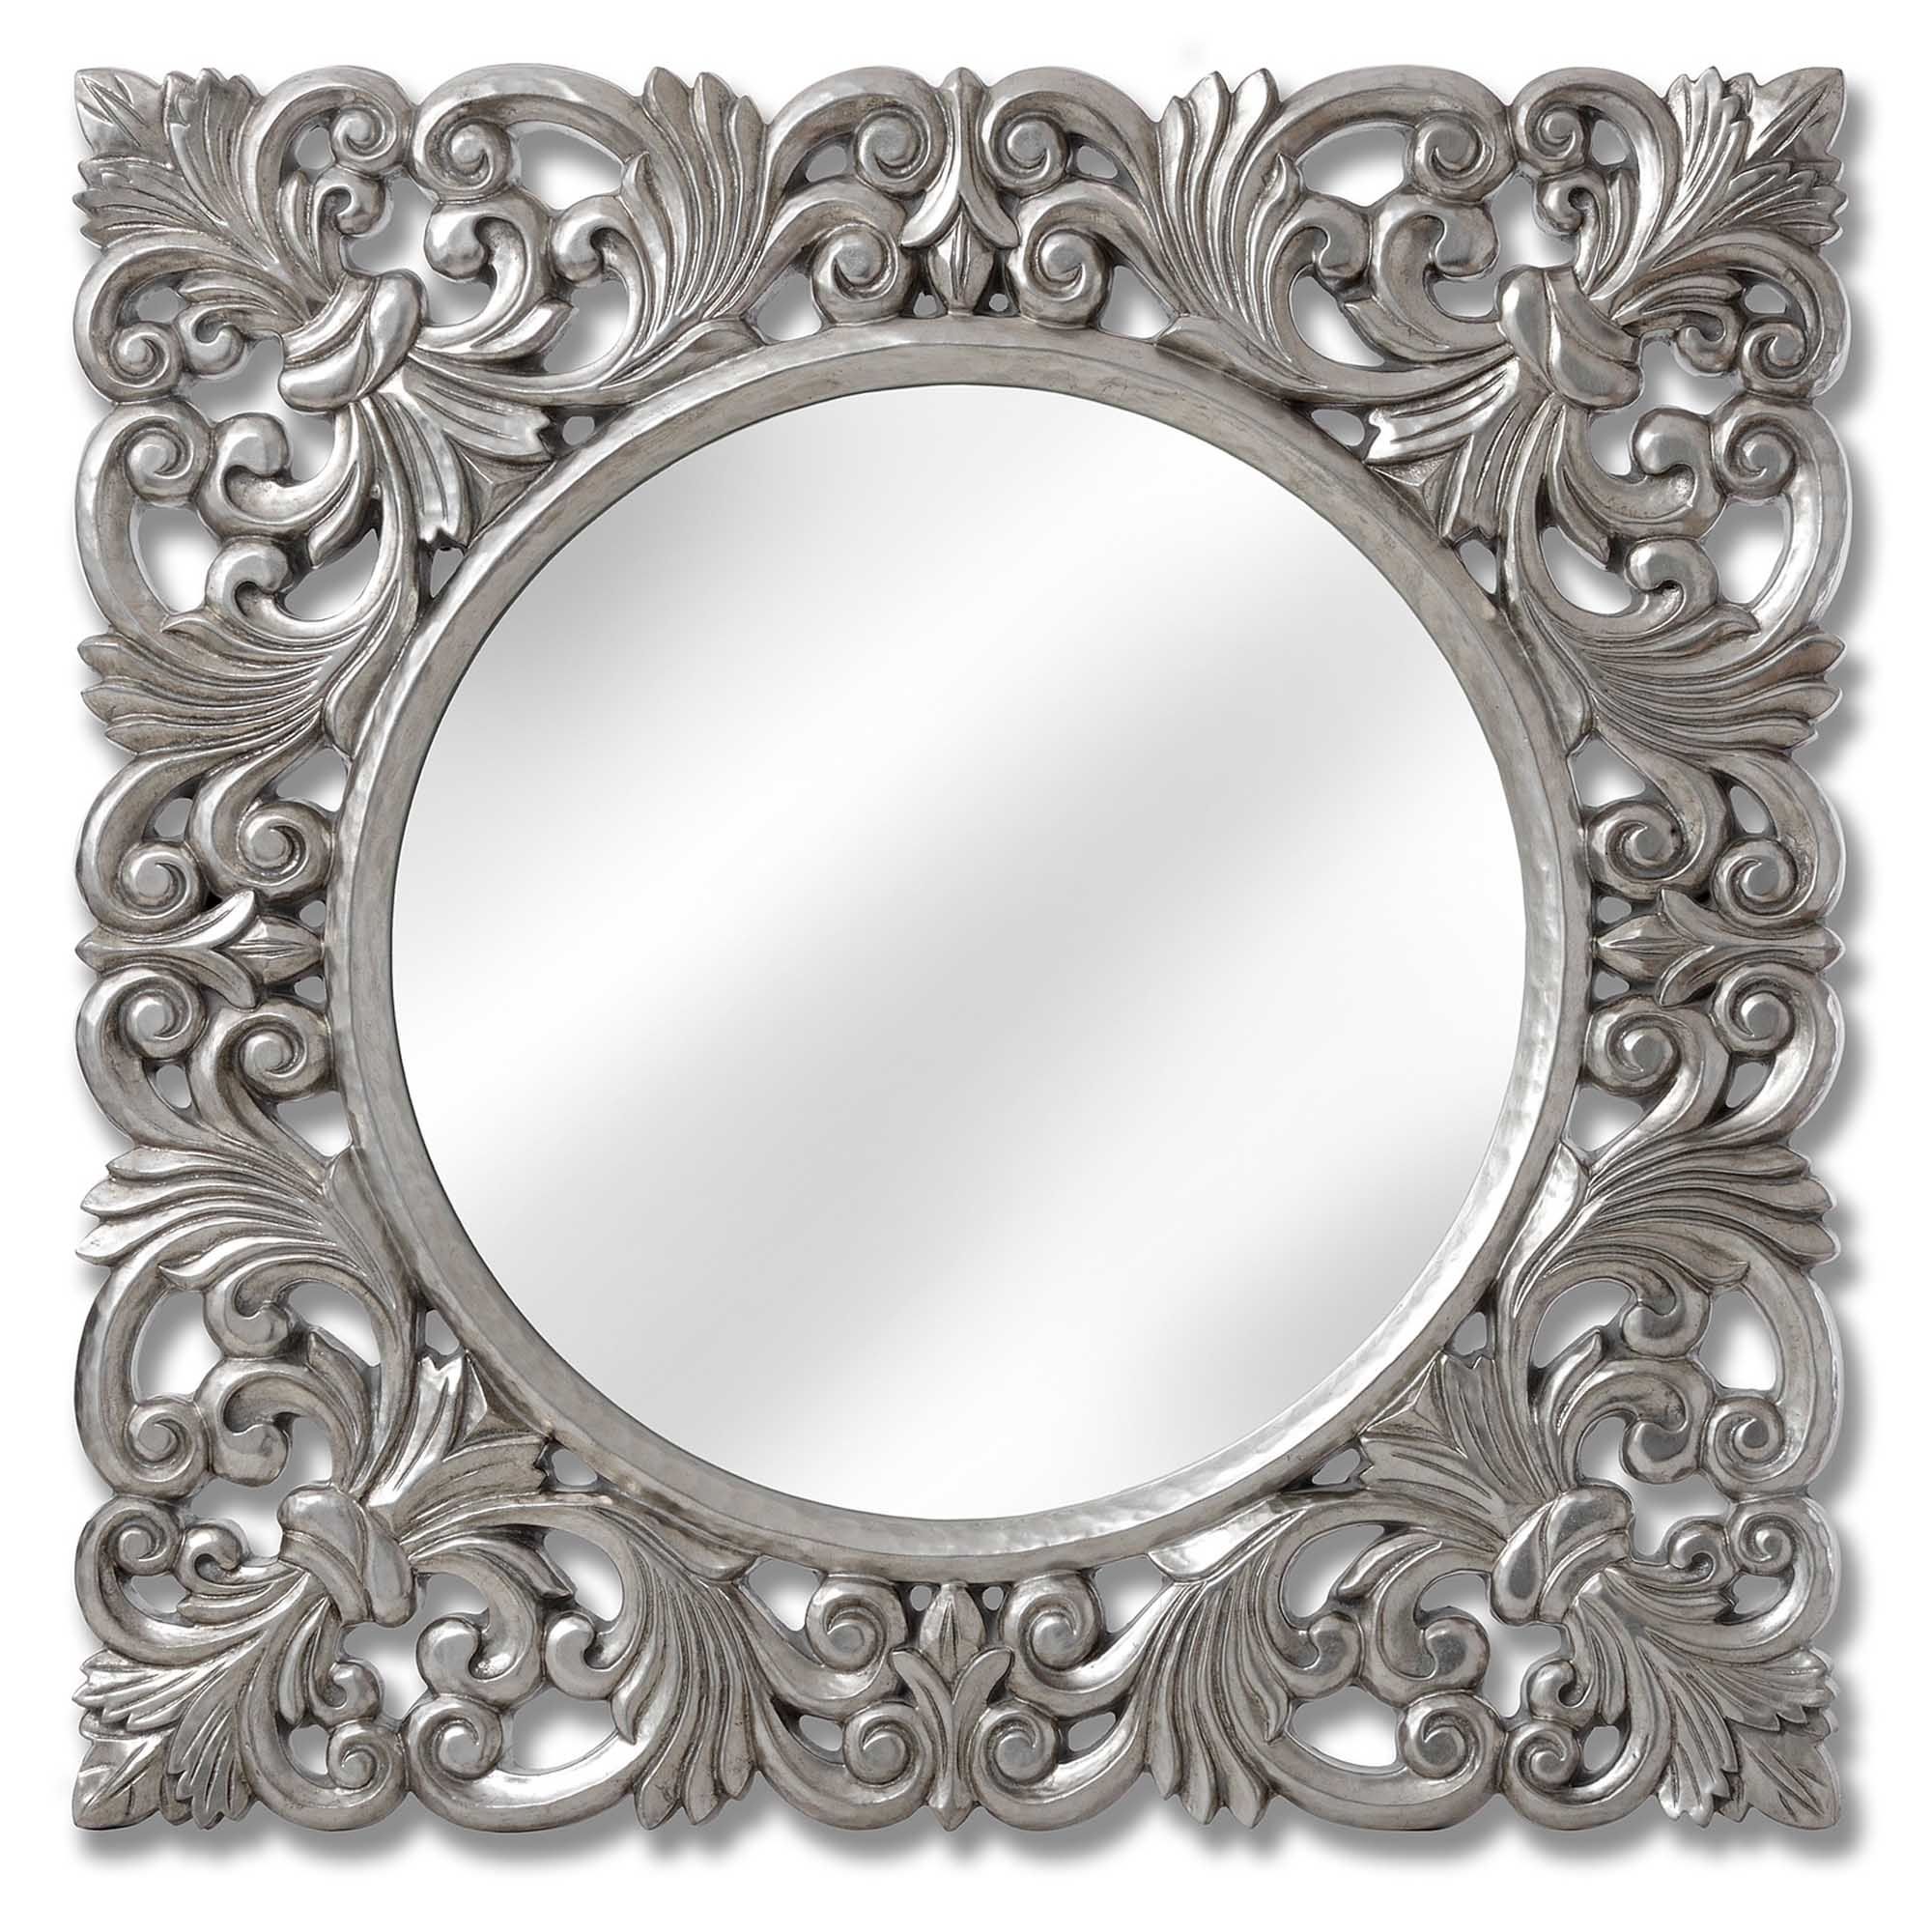 Baroque Antique French Style Silver Wall Mirror | Homesdirect365 With Regard To Silver Quatrefoil Wall Mirrors (View 3 of 15)